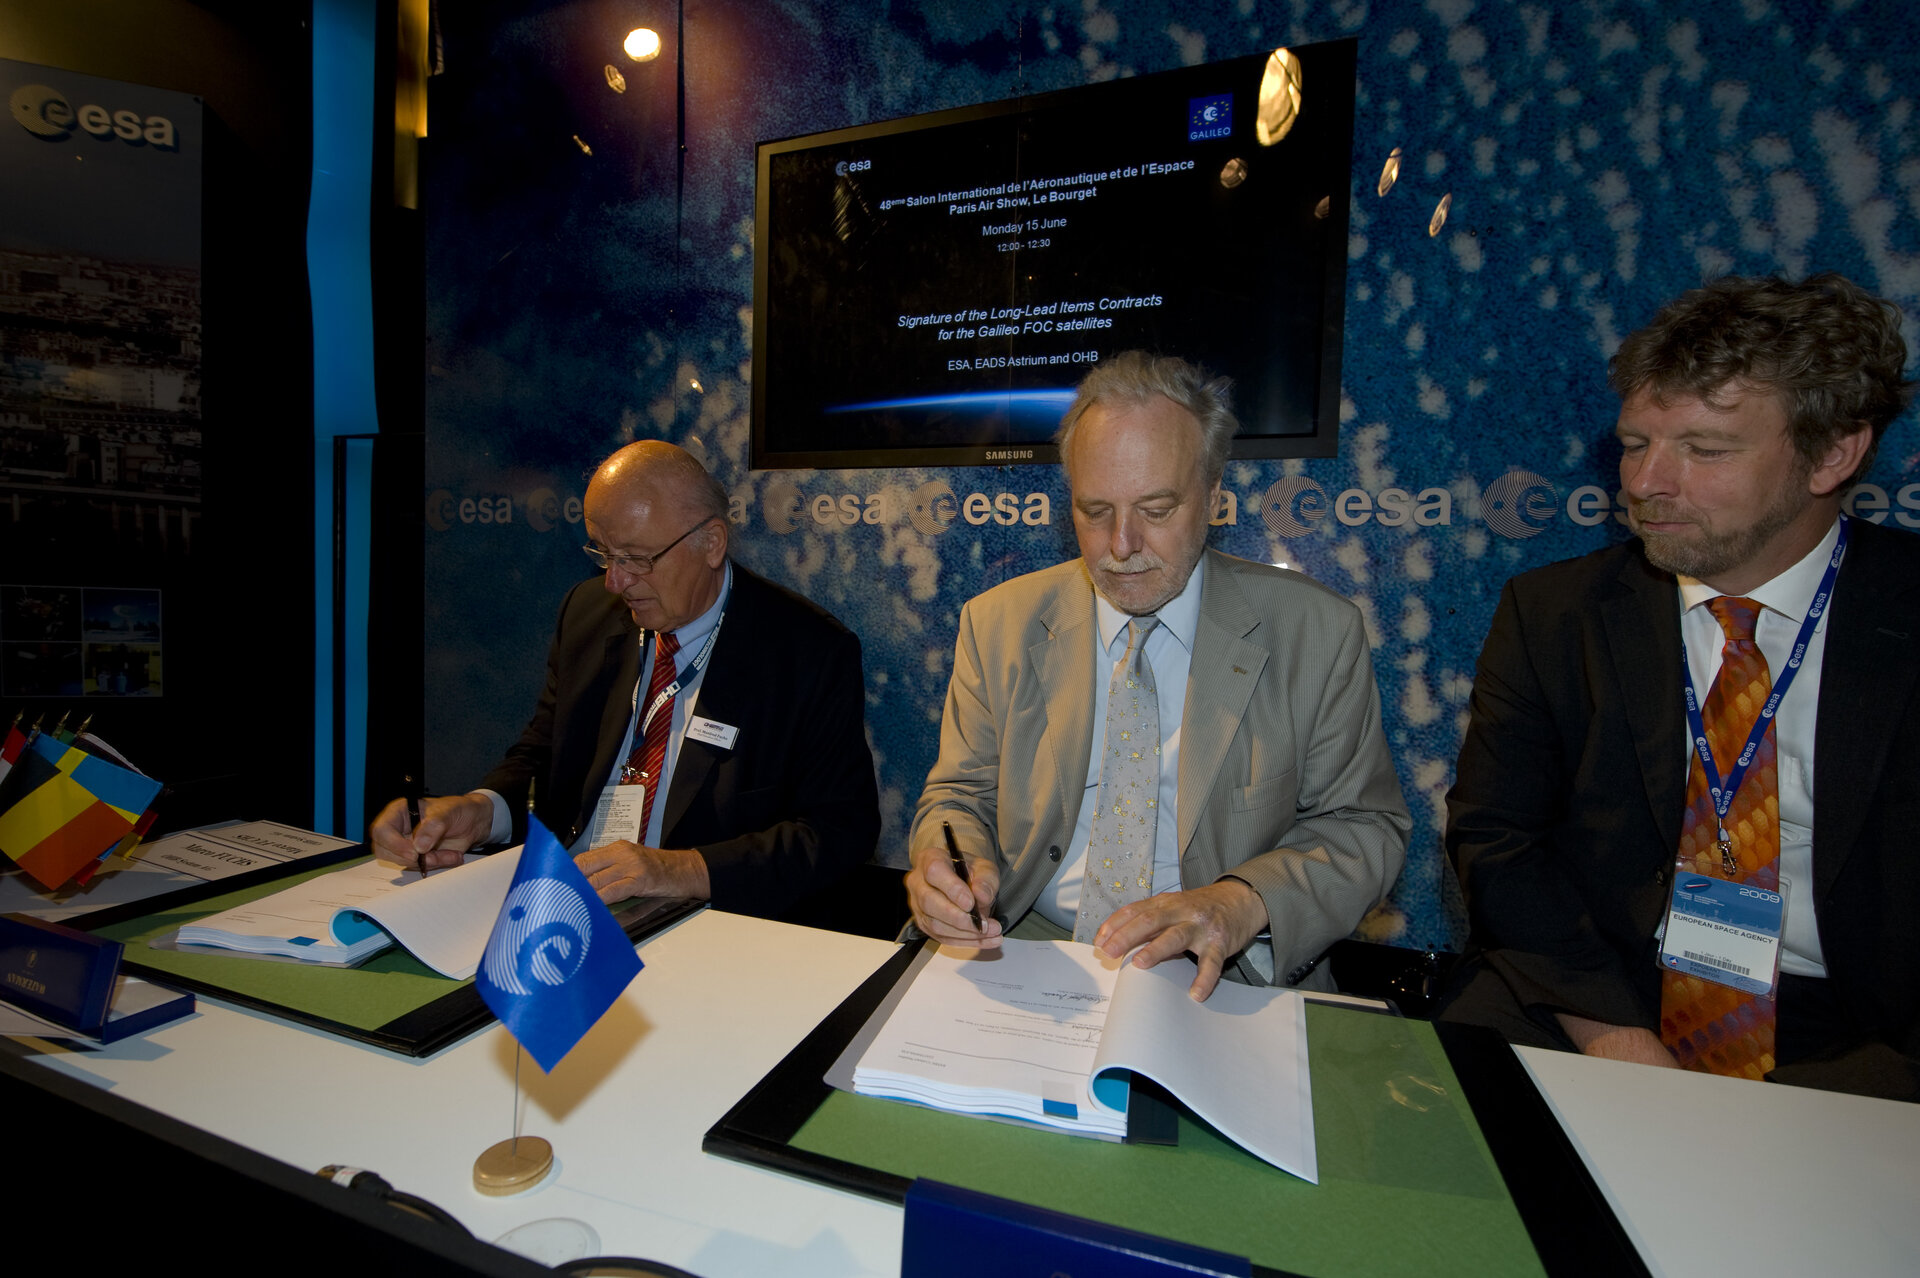 Signature of the Long-Lead Items Contracts for the Galileo FOC satellites